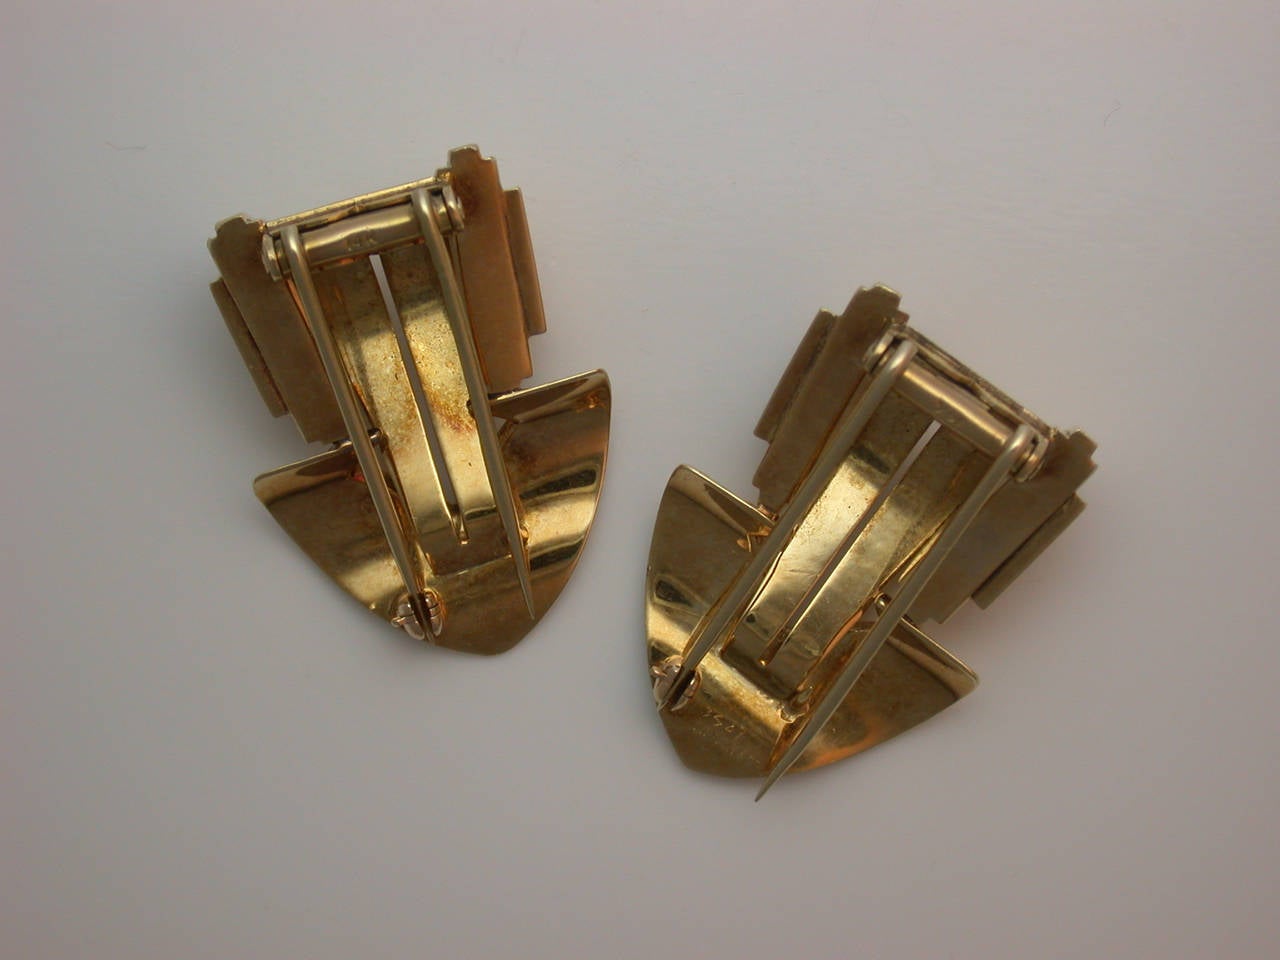 Of typical architectural form, the polished yellow gold dress clips with strong style and simple, modern lines of Machine Age design, signed Tiffany & Co., stamped 14K, hinged double pin clip backs and safety catches, measuring approximately 1 3/8